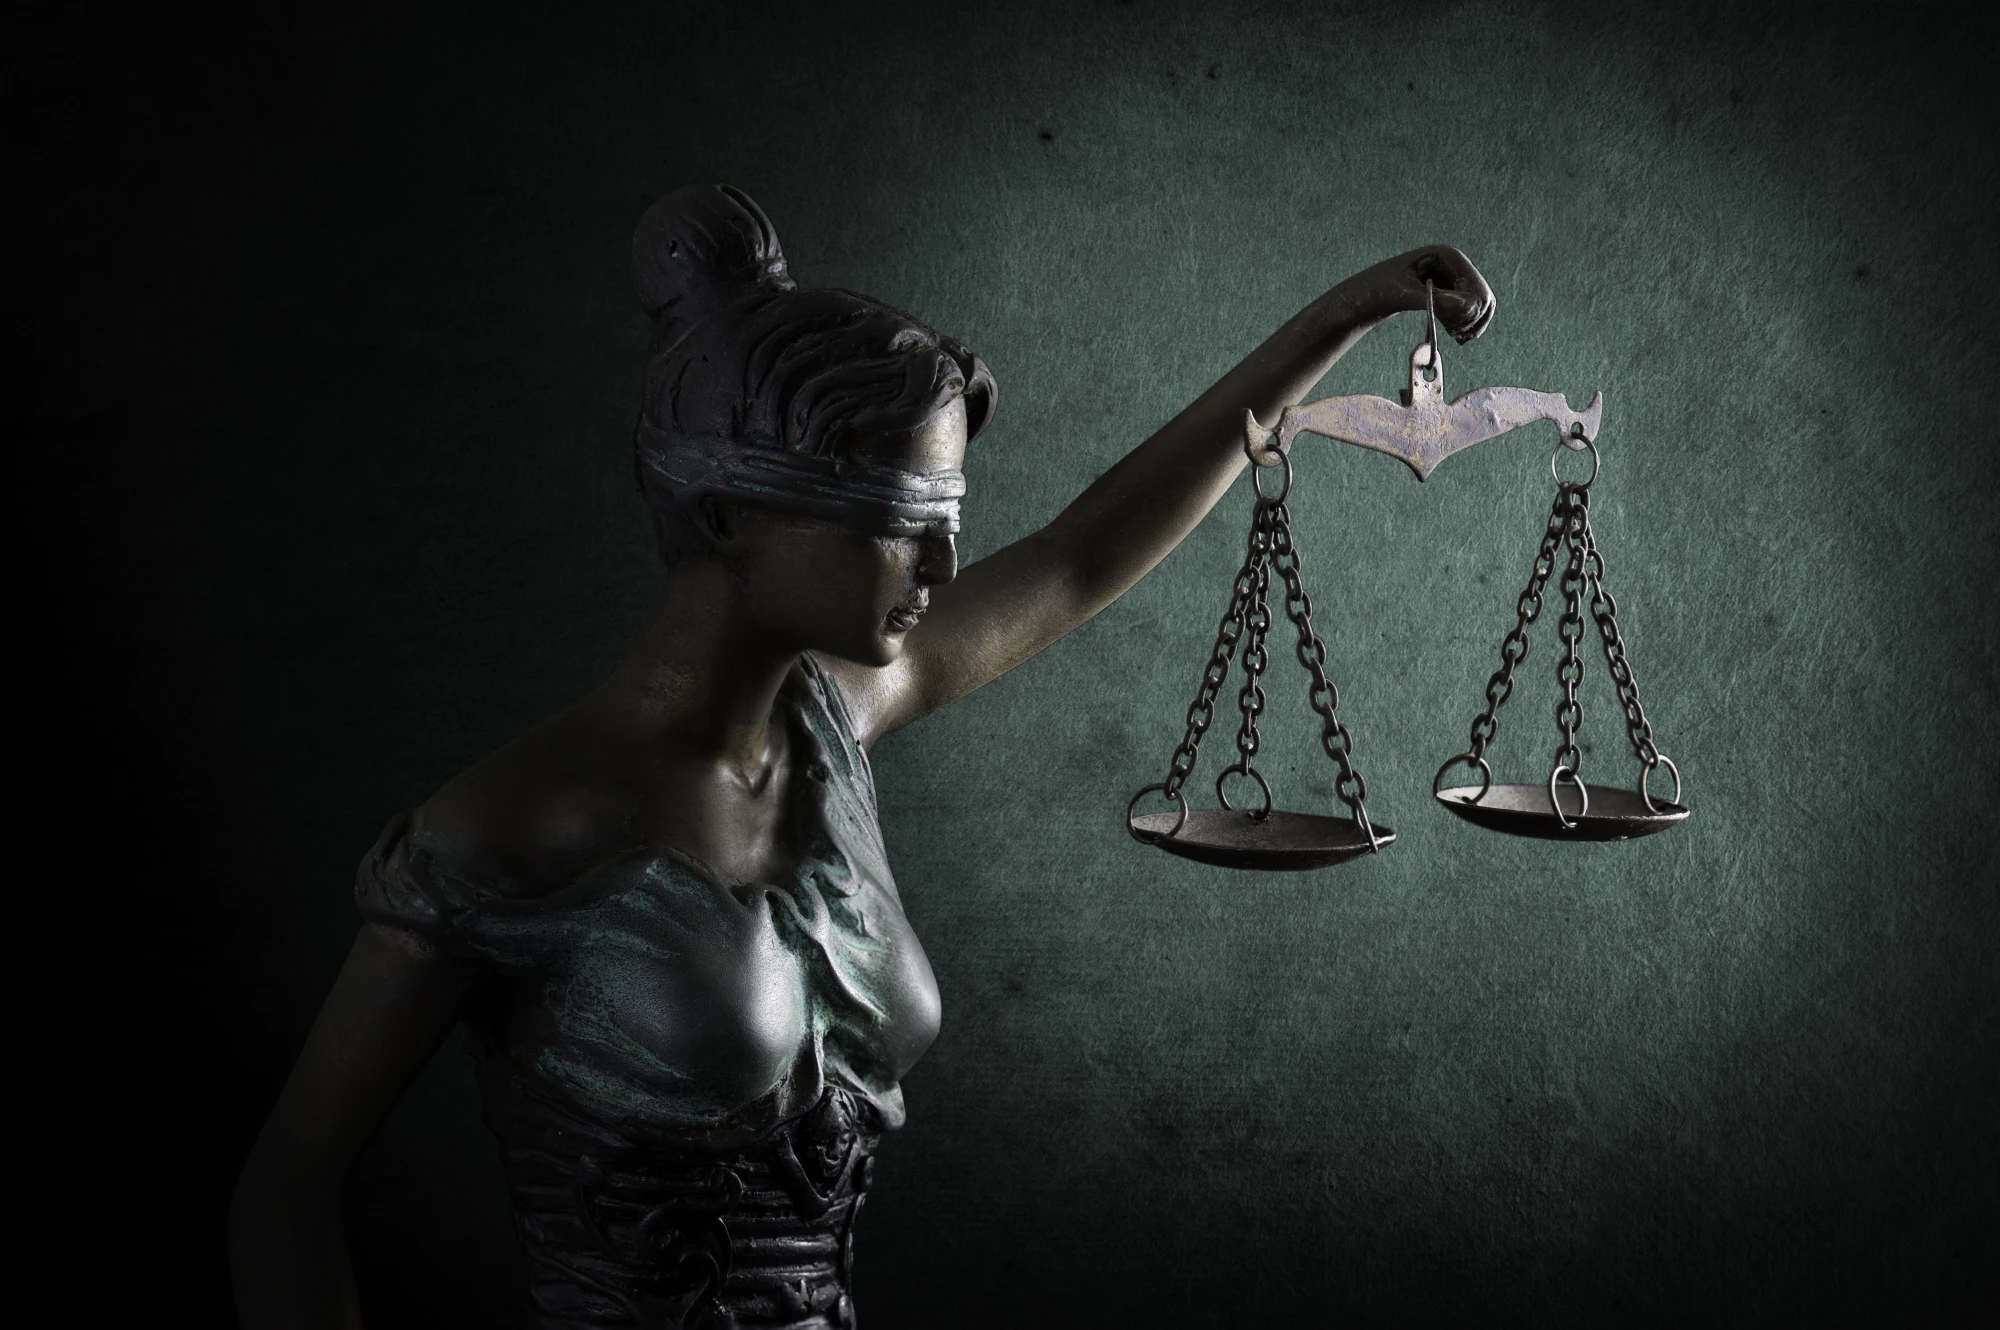 Lady justice holding the scales